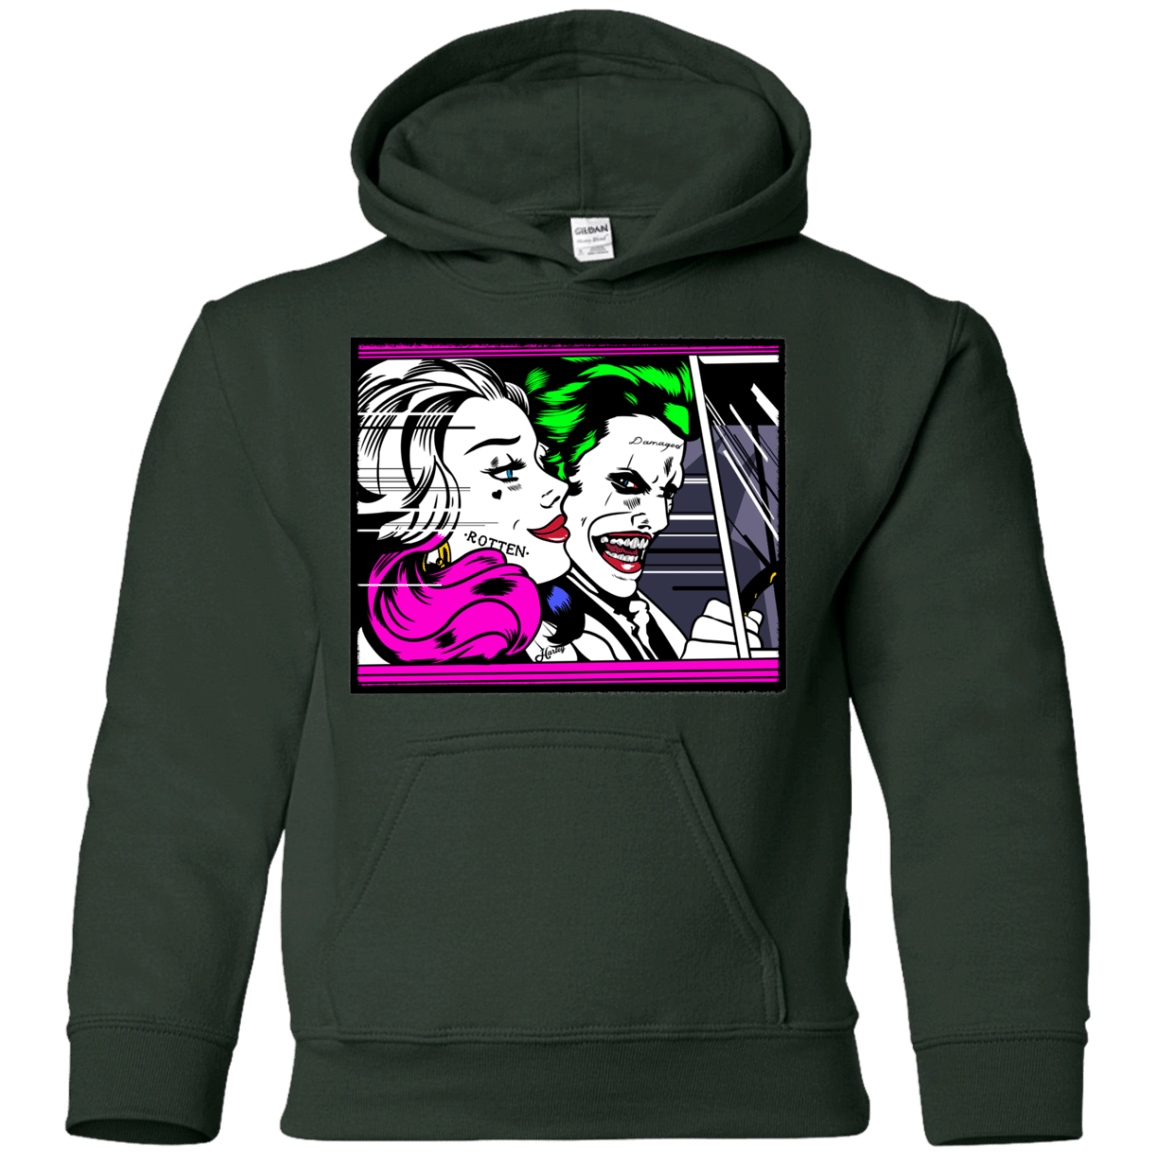 Sweatshirts Forest Green / YS In The Jokecar Youth Hoodie